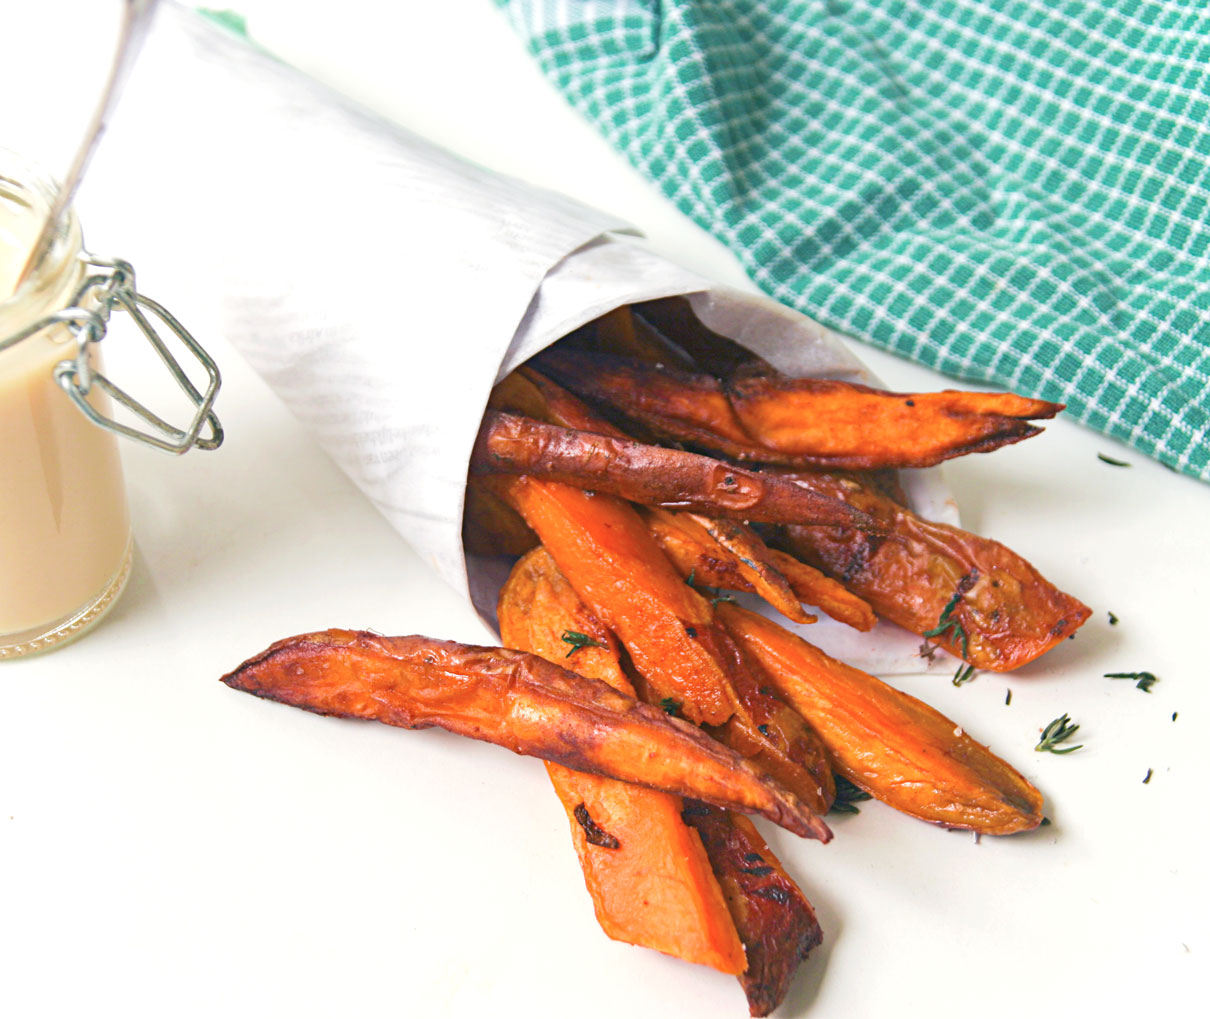 Share Love Not Secets sweet potato fries